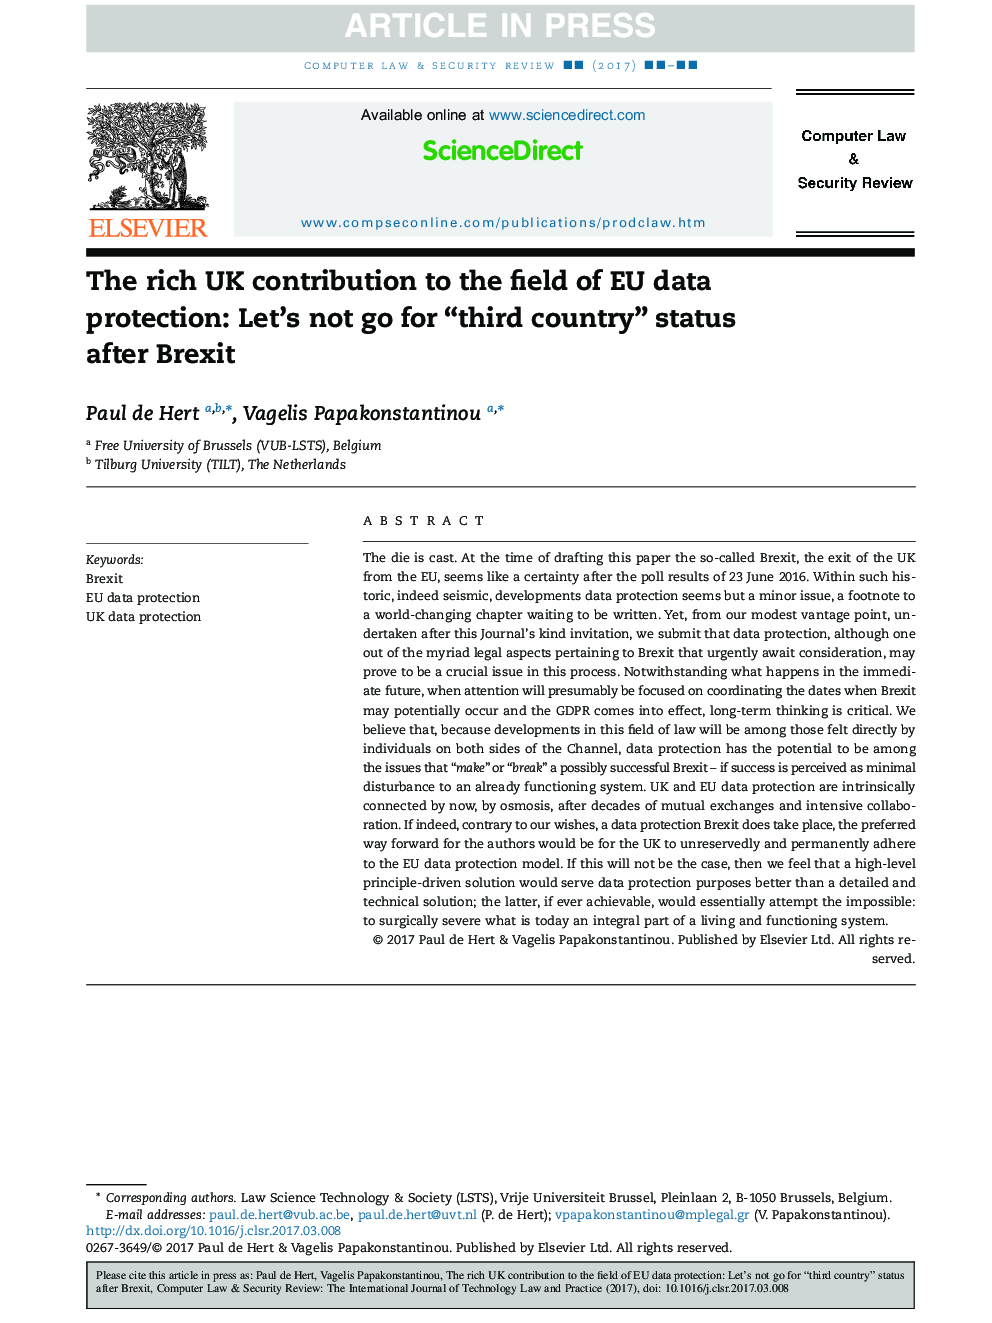 The rich UK contribution to the field of EU data protection: Let's not go for “third country” status after Brexit